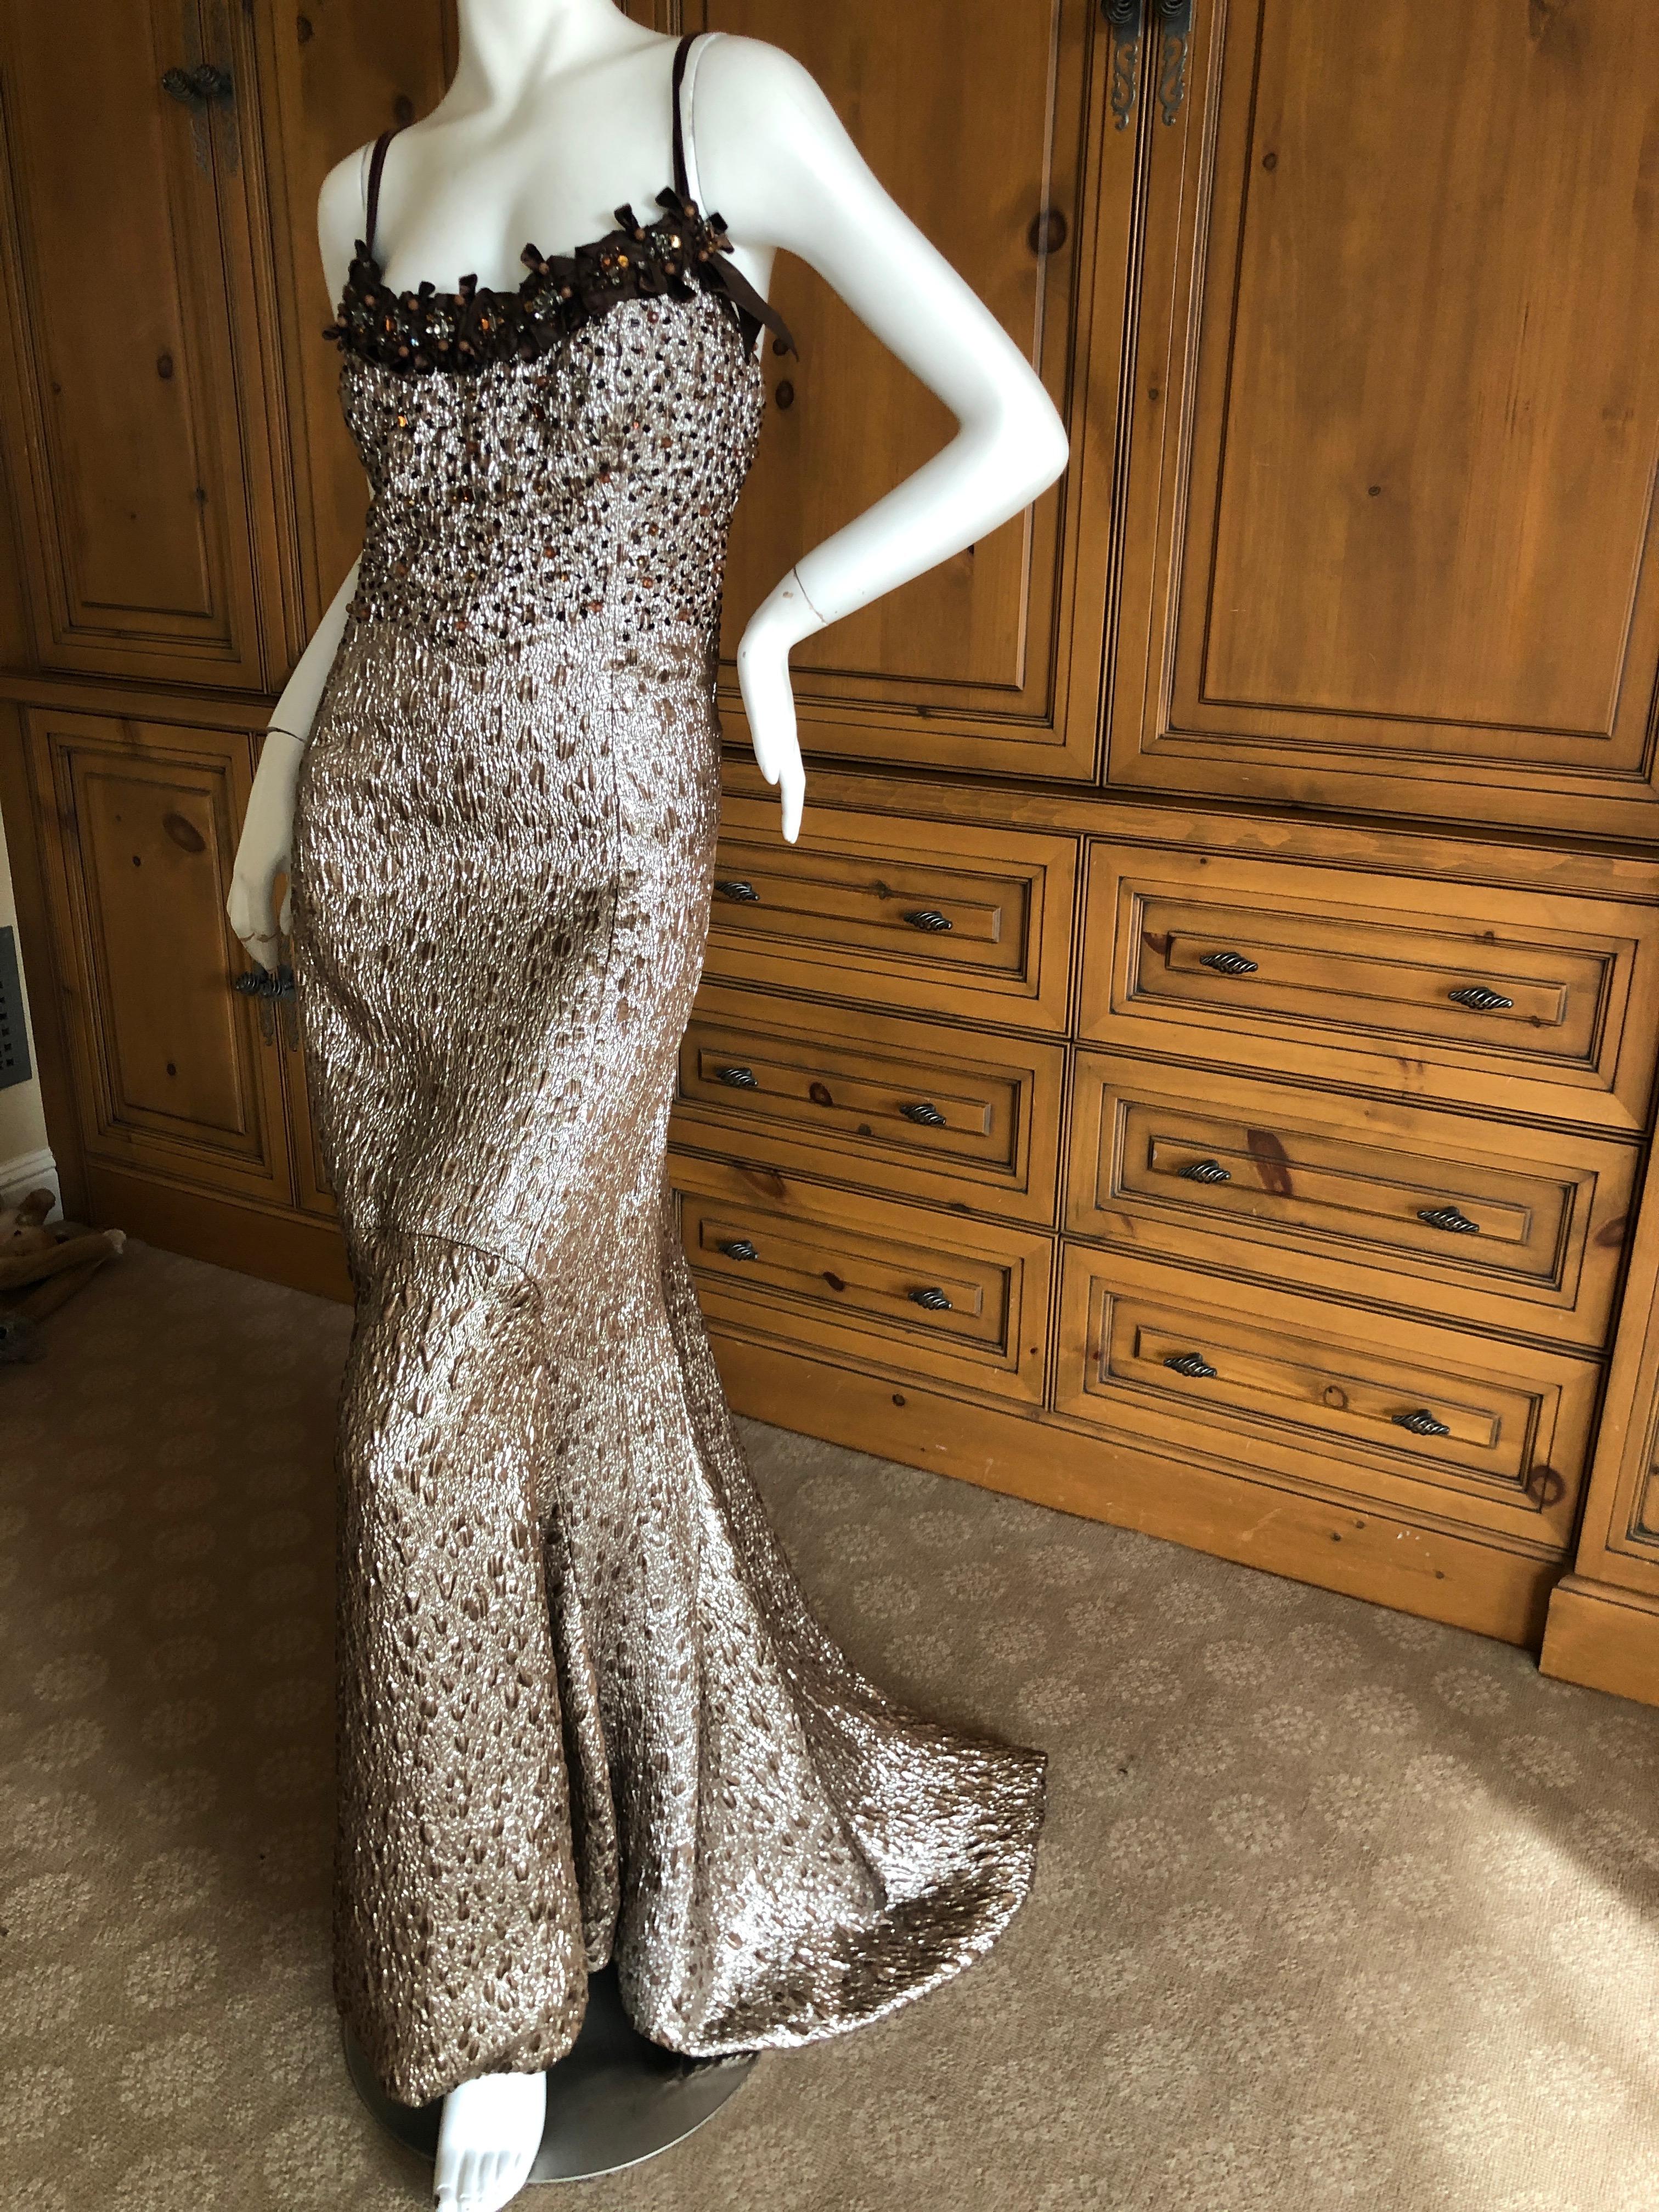 Carolina Herrera Gold Embellished Evening Gown in Hard to Find Size 14 For Sale 3